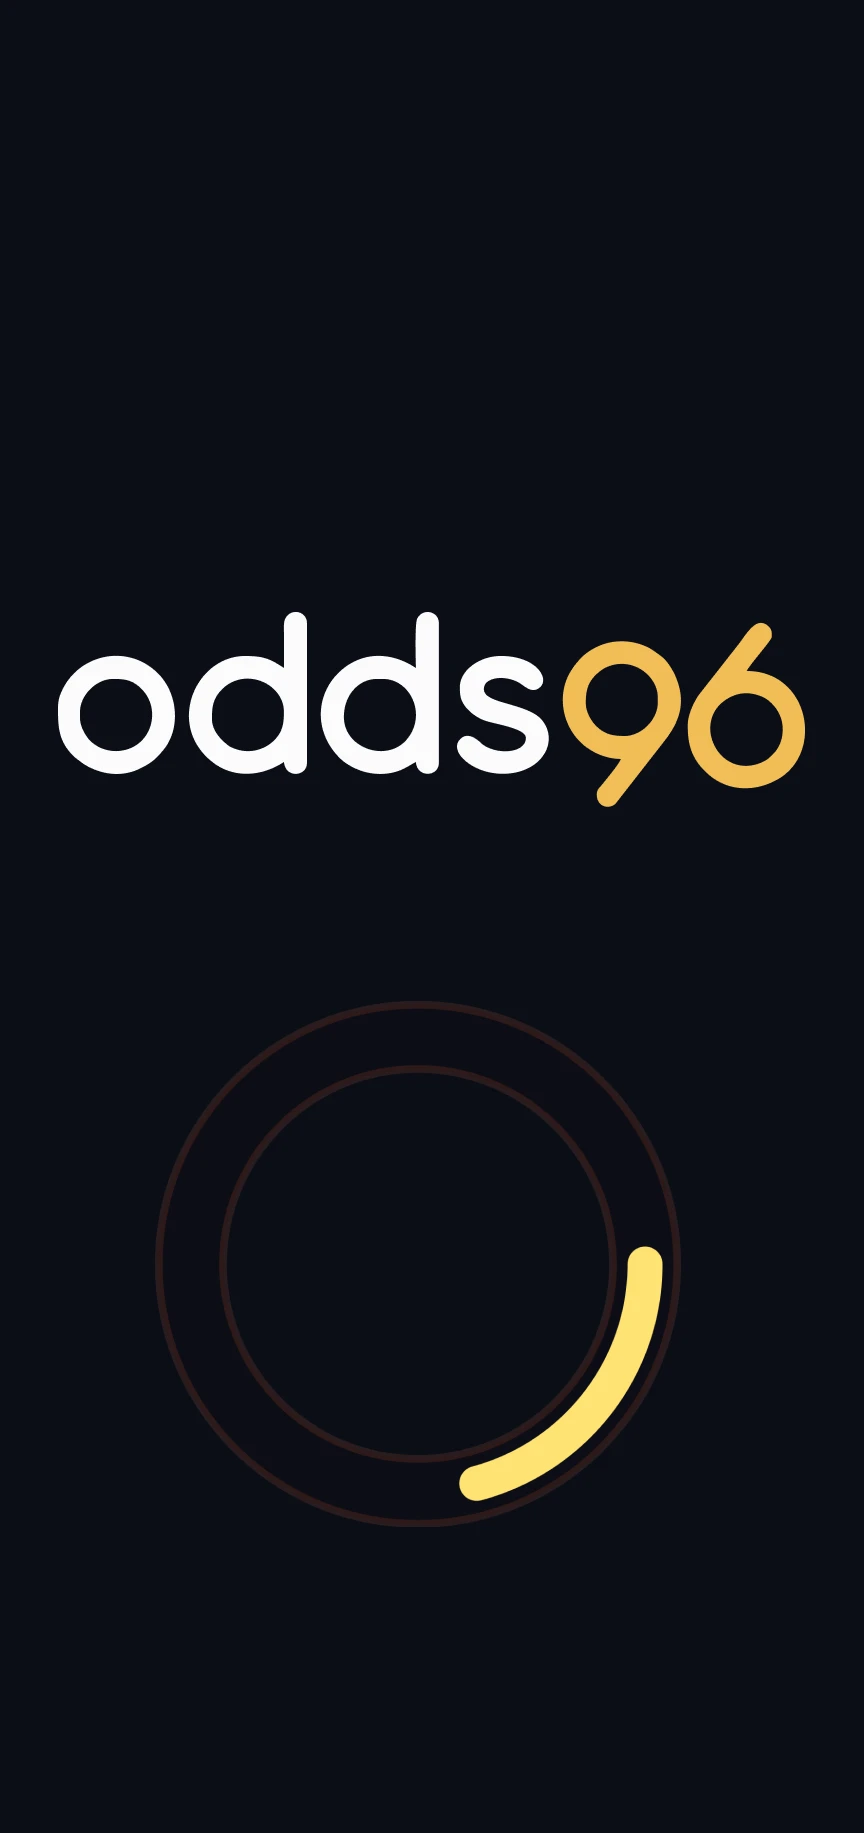 Install Odds96 apps for iOS.